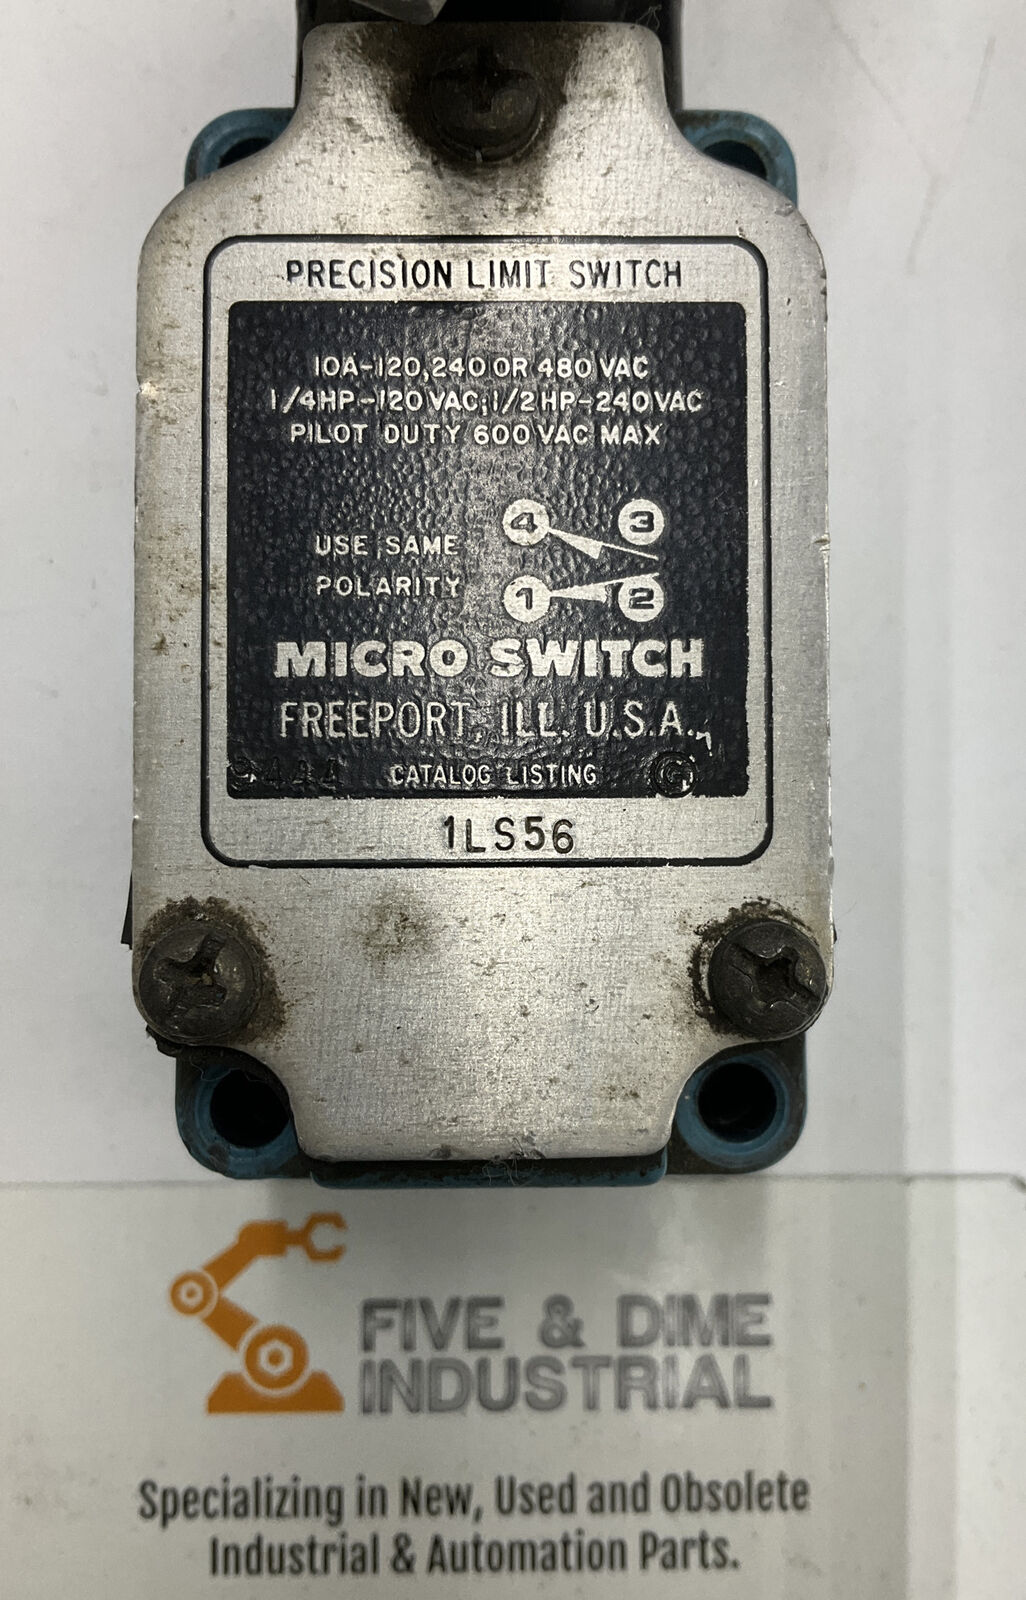 Honeywell Microswitch 1LS56 Precision Limit Switch w/ Roller (CL142)